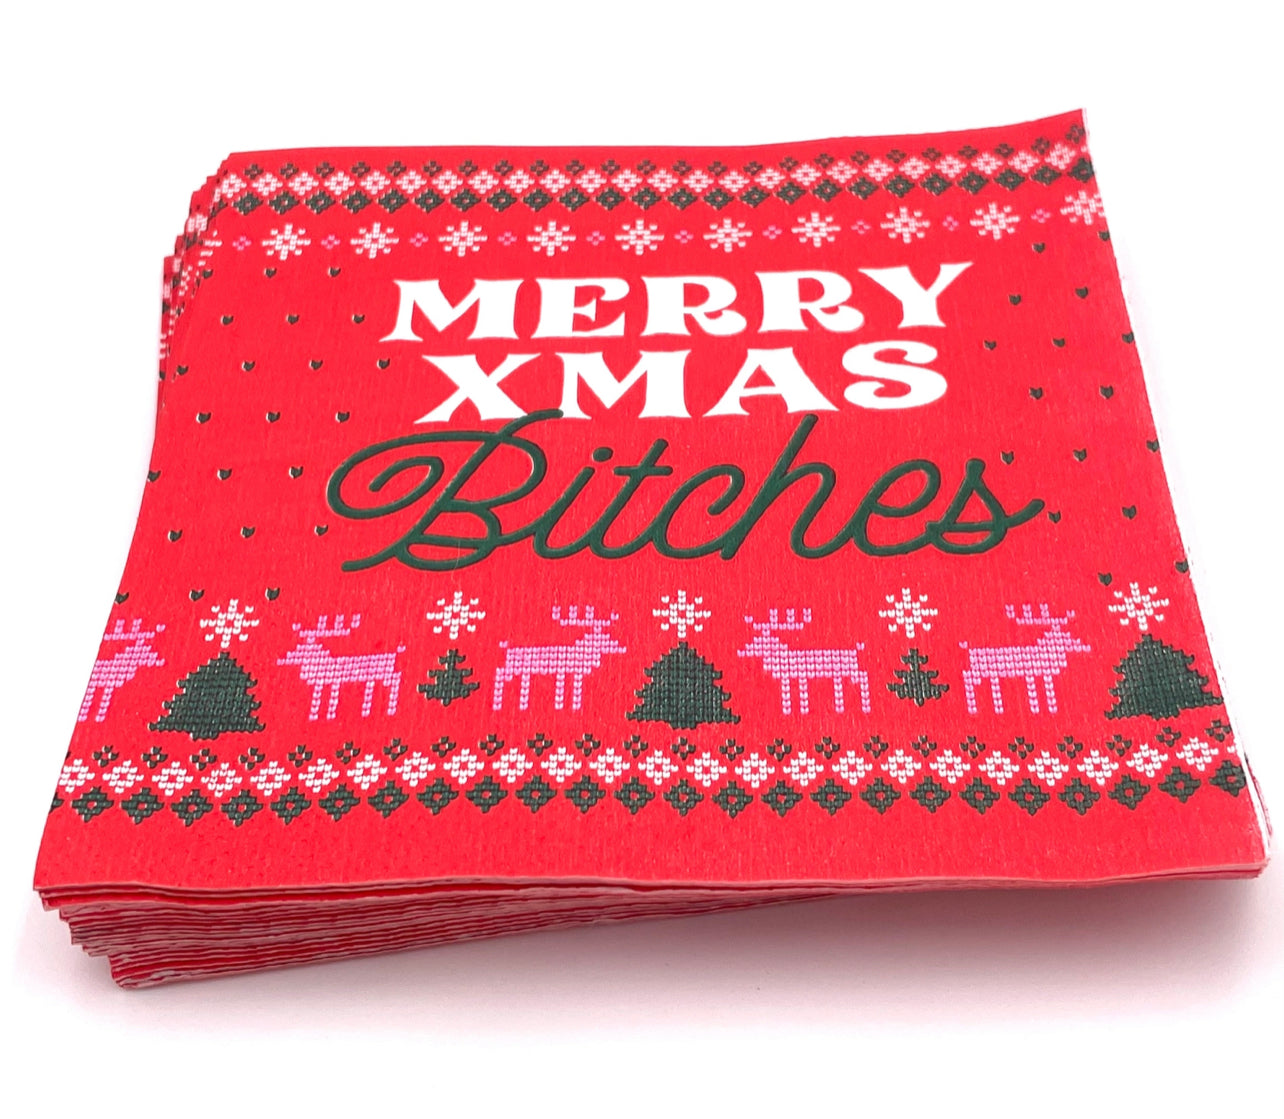 Merry Xmas B*Tches Cocktail Napkins - 20ct